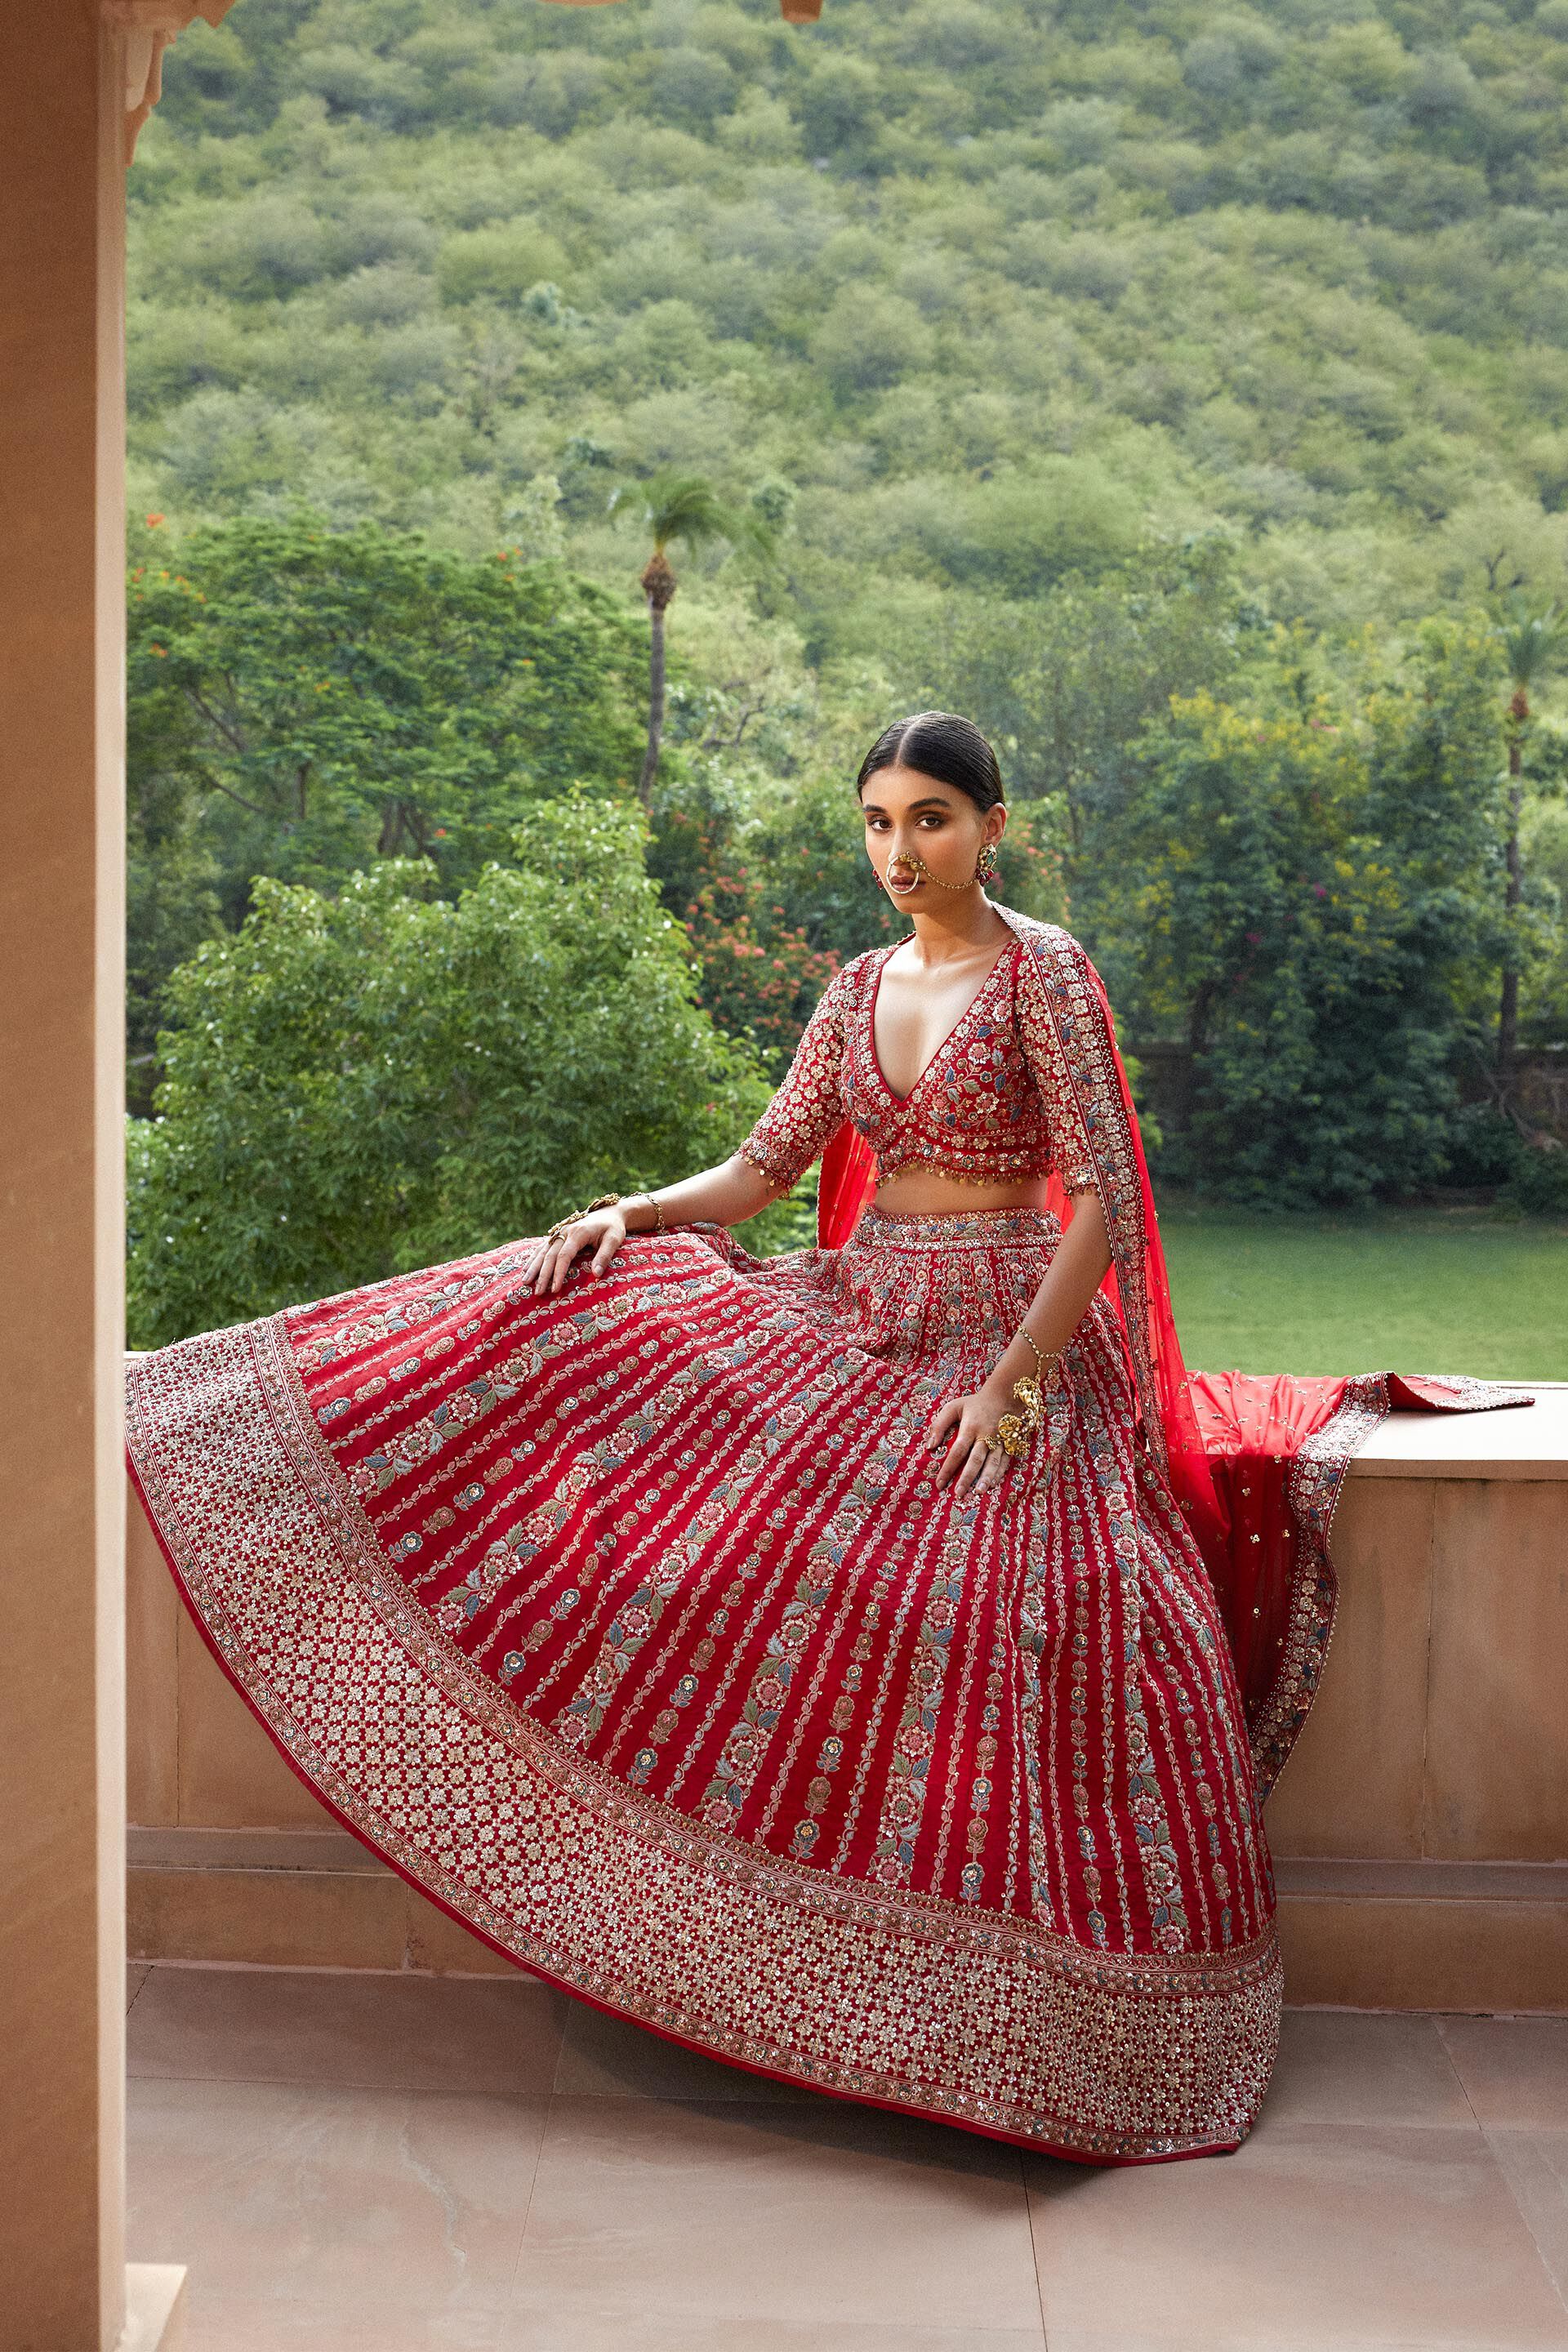 There She Glows' by Anita Dongre - Bold Outline : India's leading Online  Lifestyle, Fashion & Travel Magazine.